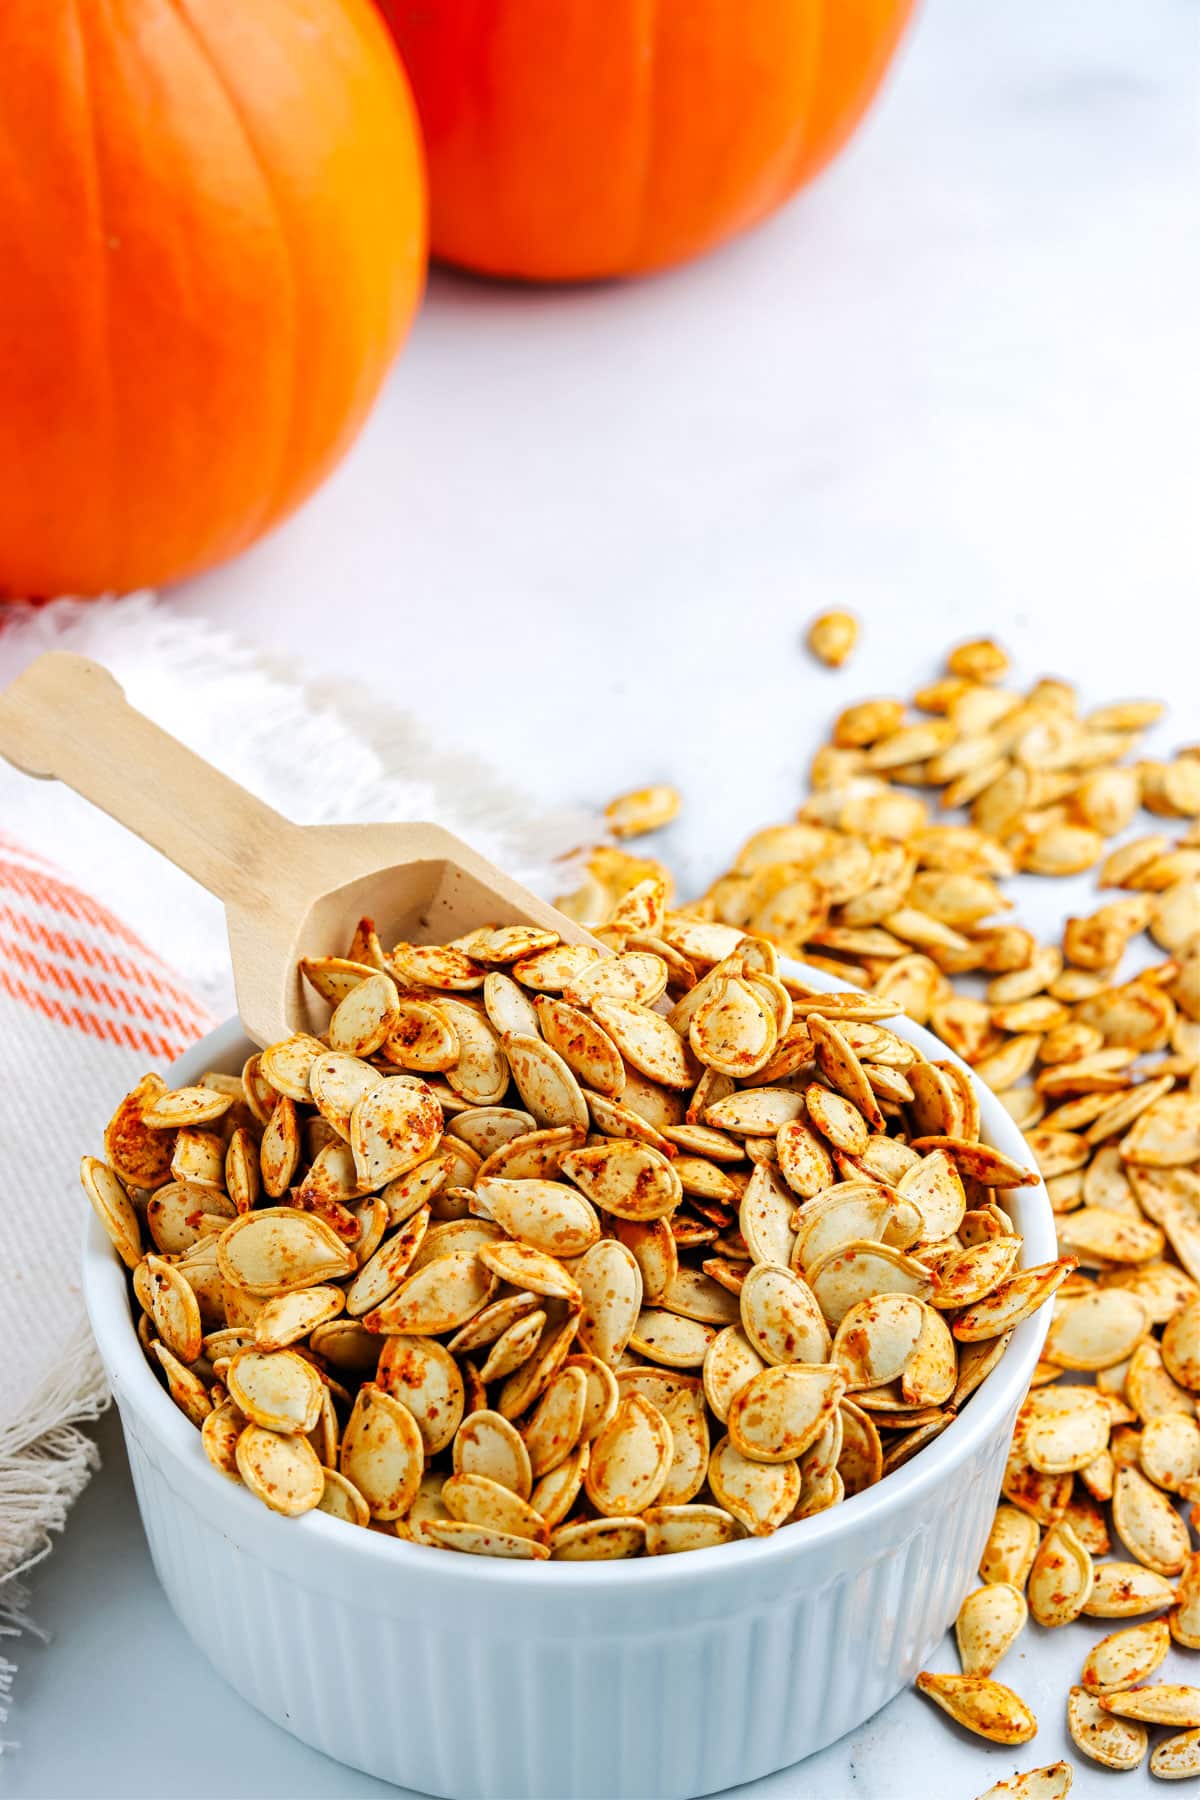 A serving spoon in a bowl of toasted pumpkin seeds.